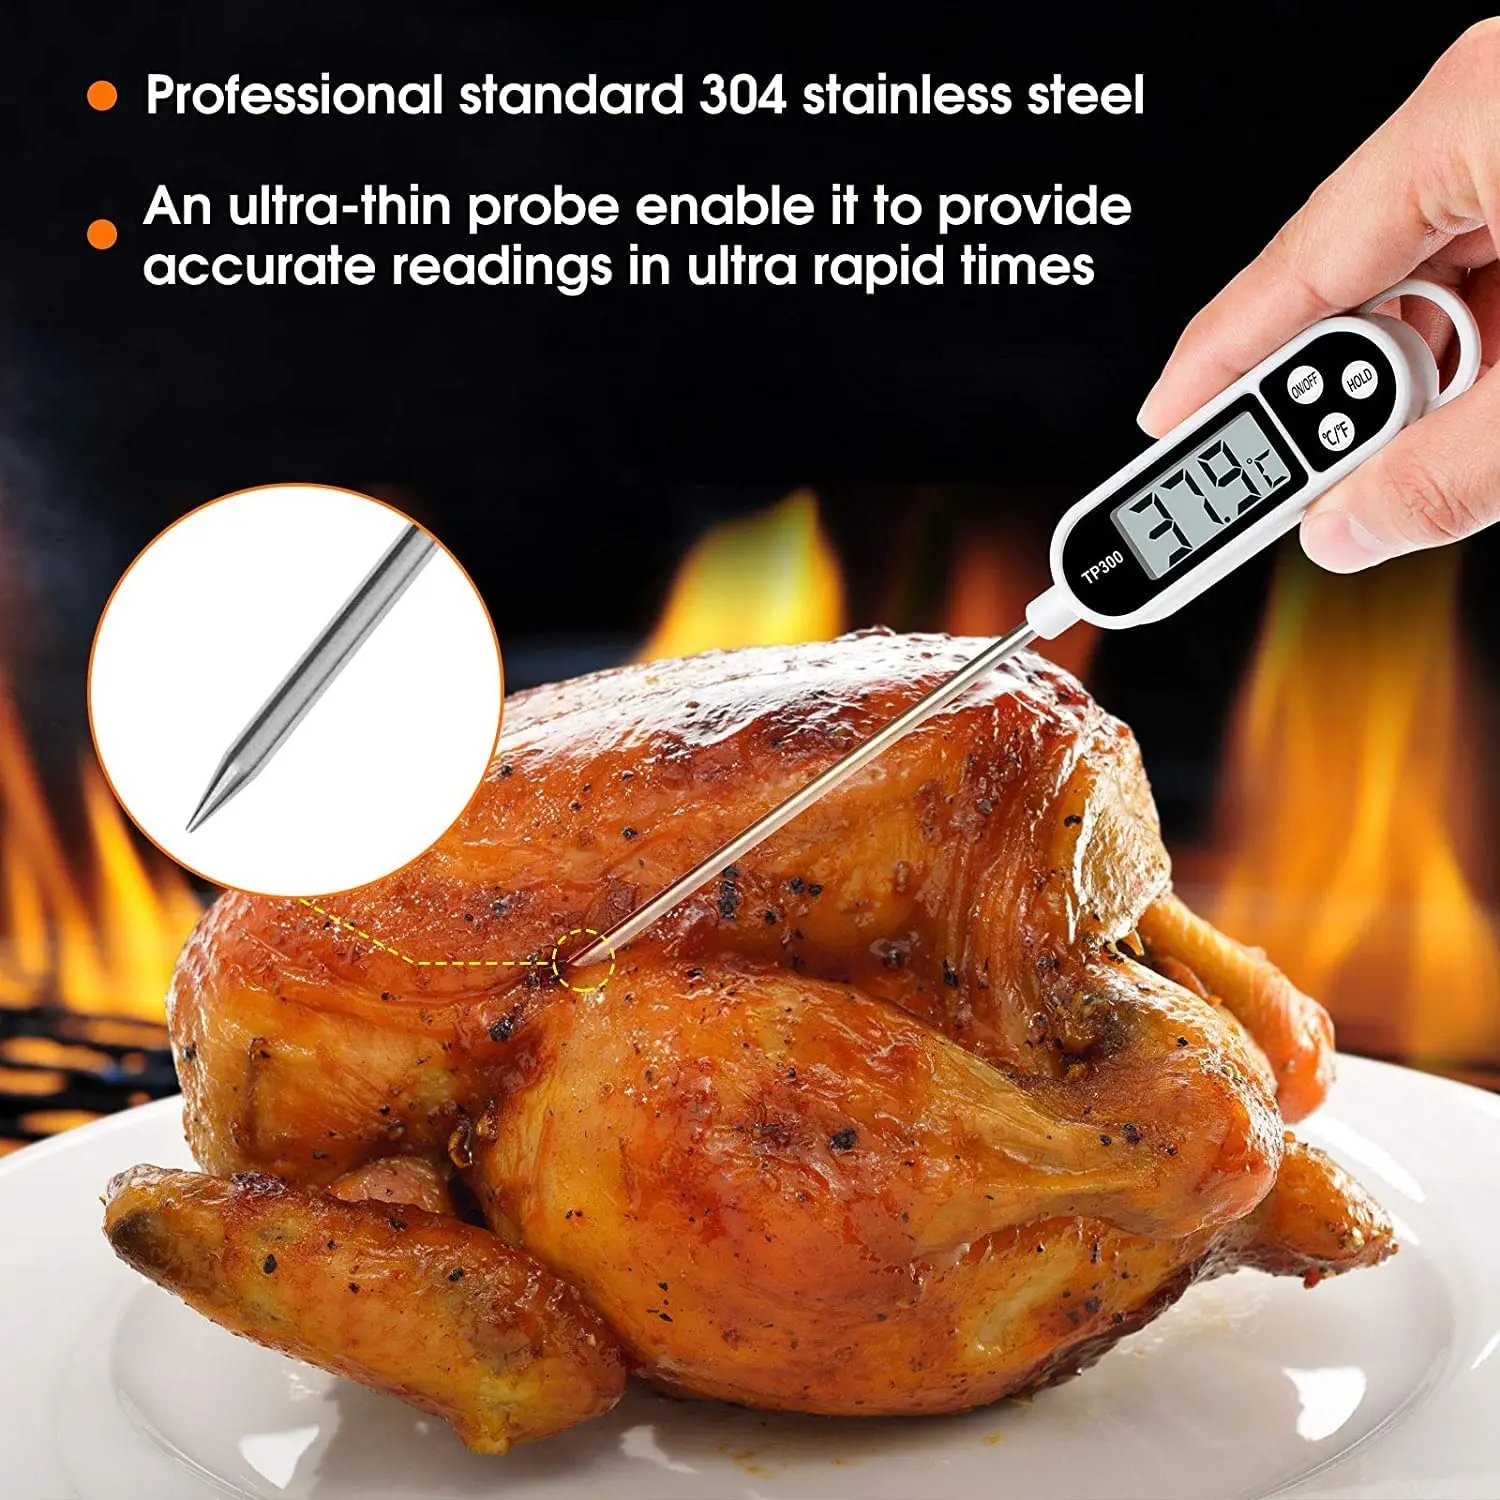 https://ae01.alicdn.com/kf/S1736168ce49b4f6f8c442891389059a1Z/Food-Thermometer-Digital-Meat-Cooking-Thermometer-Instant-Read-Long-Probe-Auto-Off-LCD-Screen-Kitchen.jpg